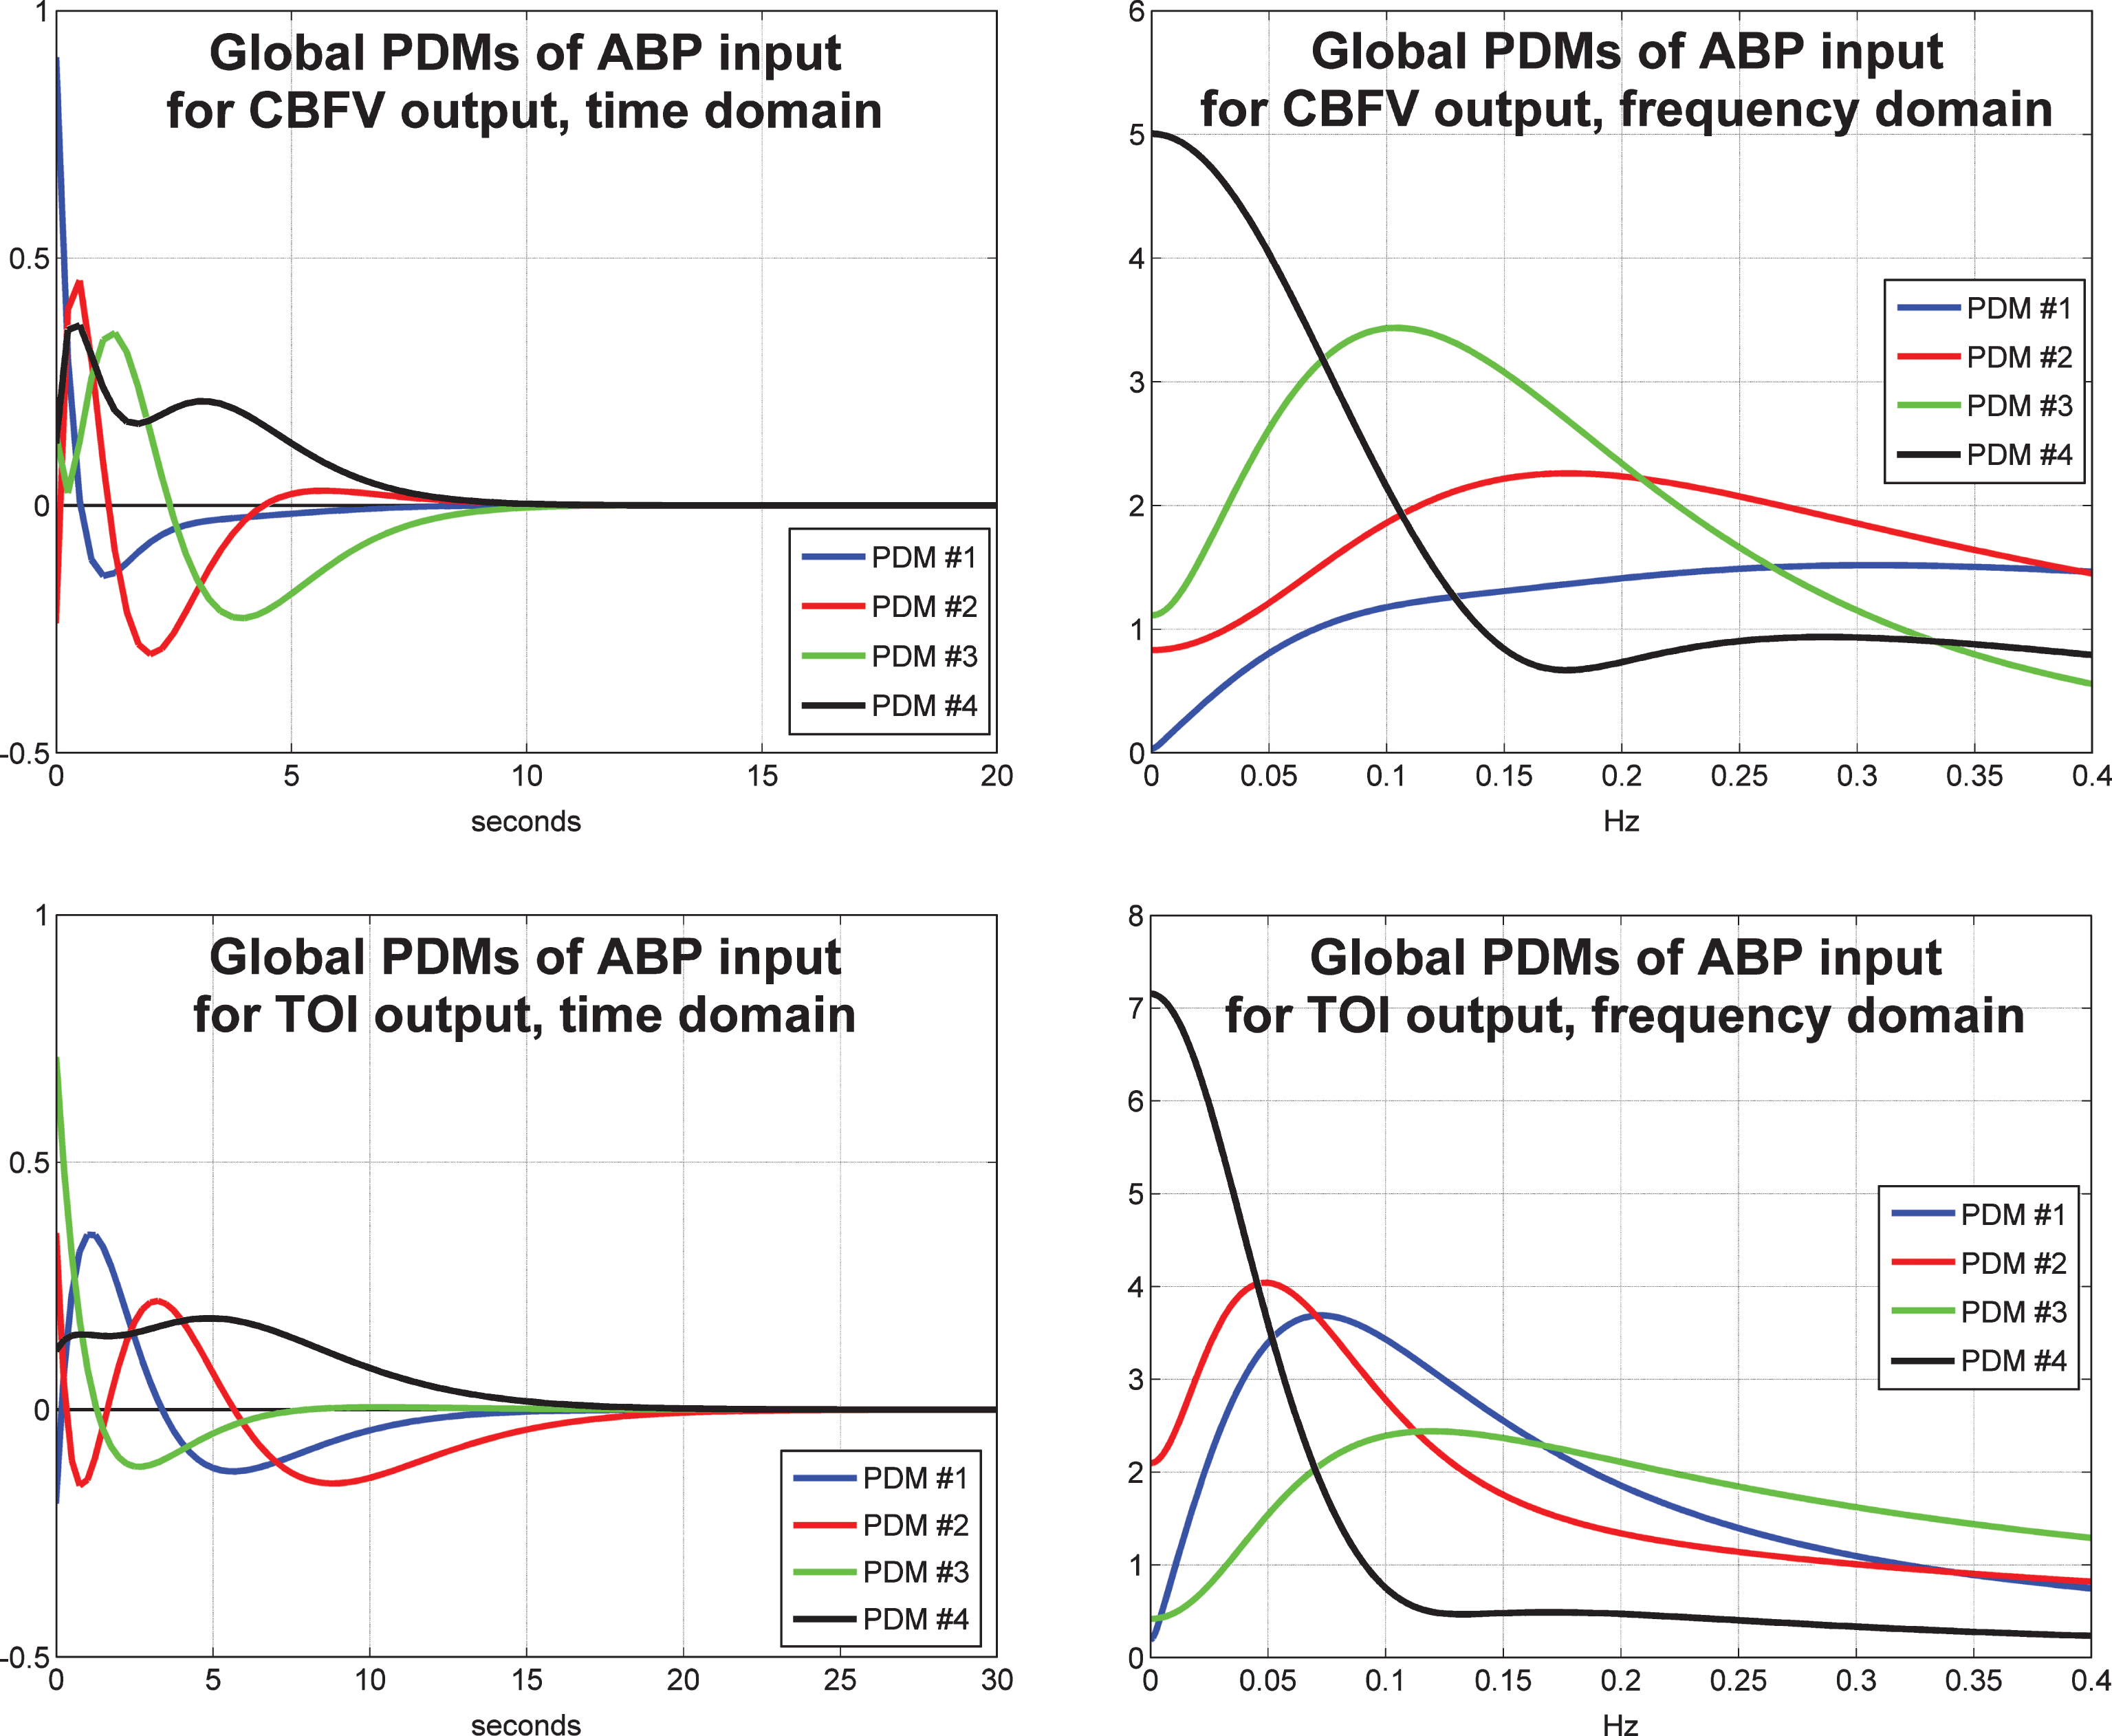 The four global PDMs for the ABP input obtained from the data of 20 control subjects (10 male and 10 female) for the CBFV output measured via TCD (top) and from the data of 22 control subjects (11 male and 11 female) for the TOI output measured via NIRS (bottom) in the time-domain (left) and frequency-domain (right).